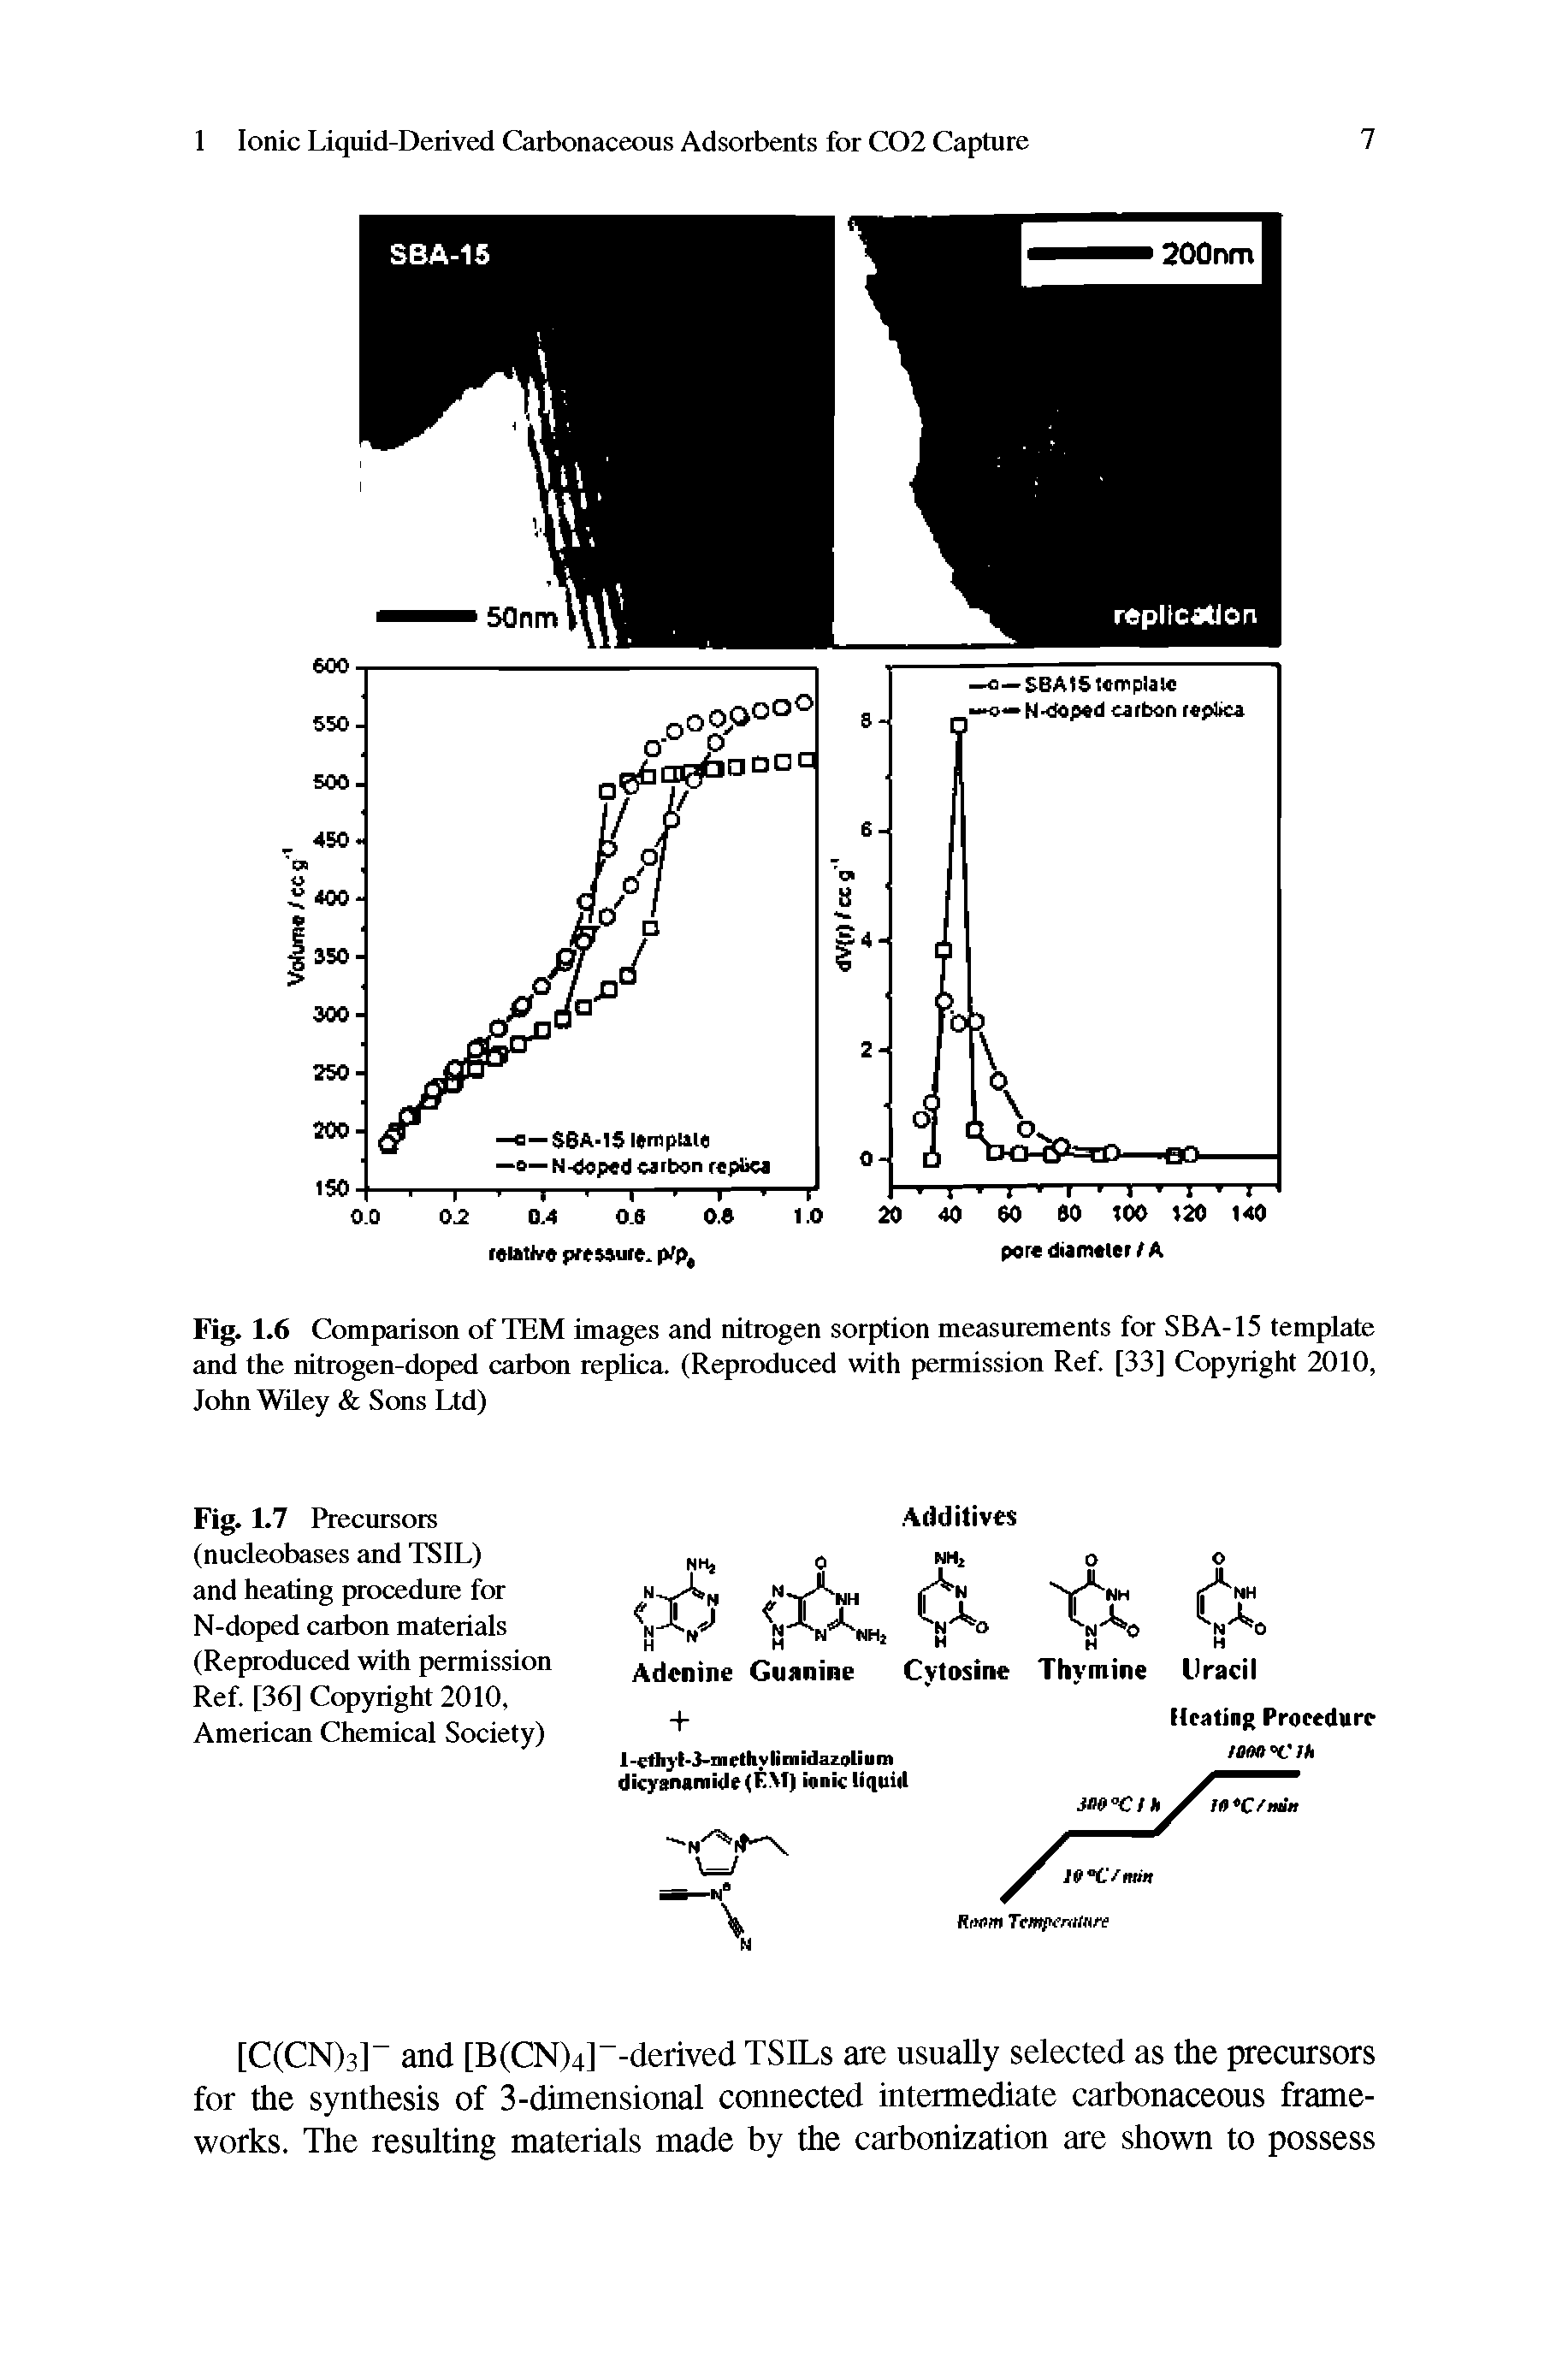 Fig. 1.6 Comparison of TEM images and nitrogen sorption measurements for SBA-15 template and the nitrogen-doped carbon replica. (Reproduced with permission Ref [33] Copyright 2010, John Wiley Sons Ltd)...